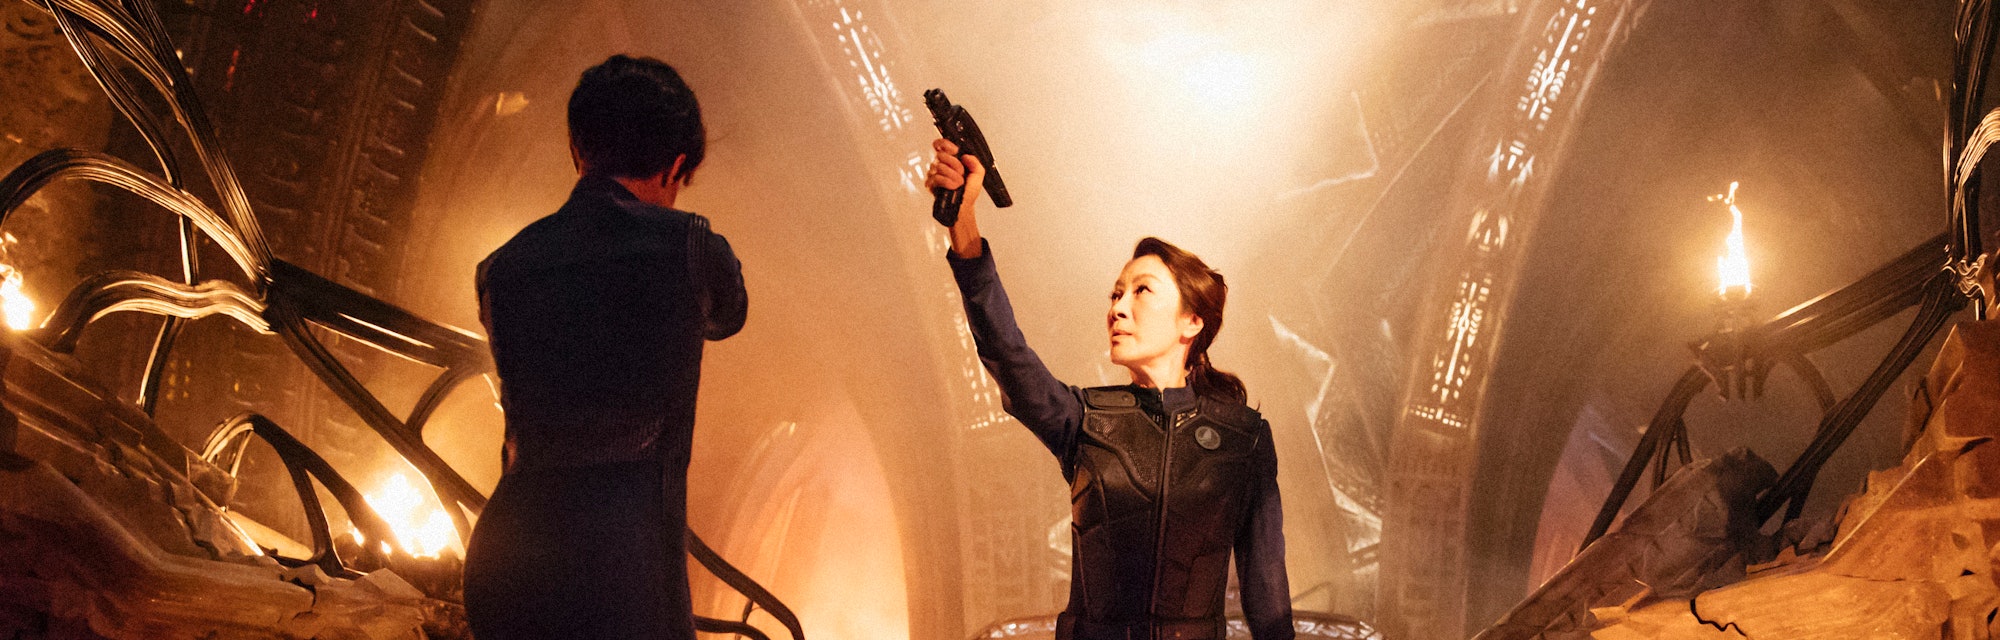 Michelle Yeoh and Sonequa Martin-Green in the debut of 'Star Trek: Discovery' in 2017.